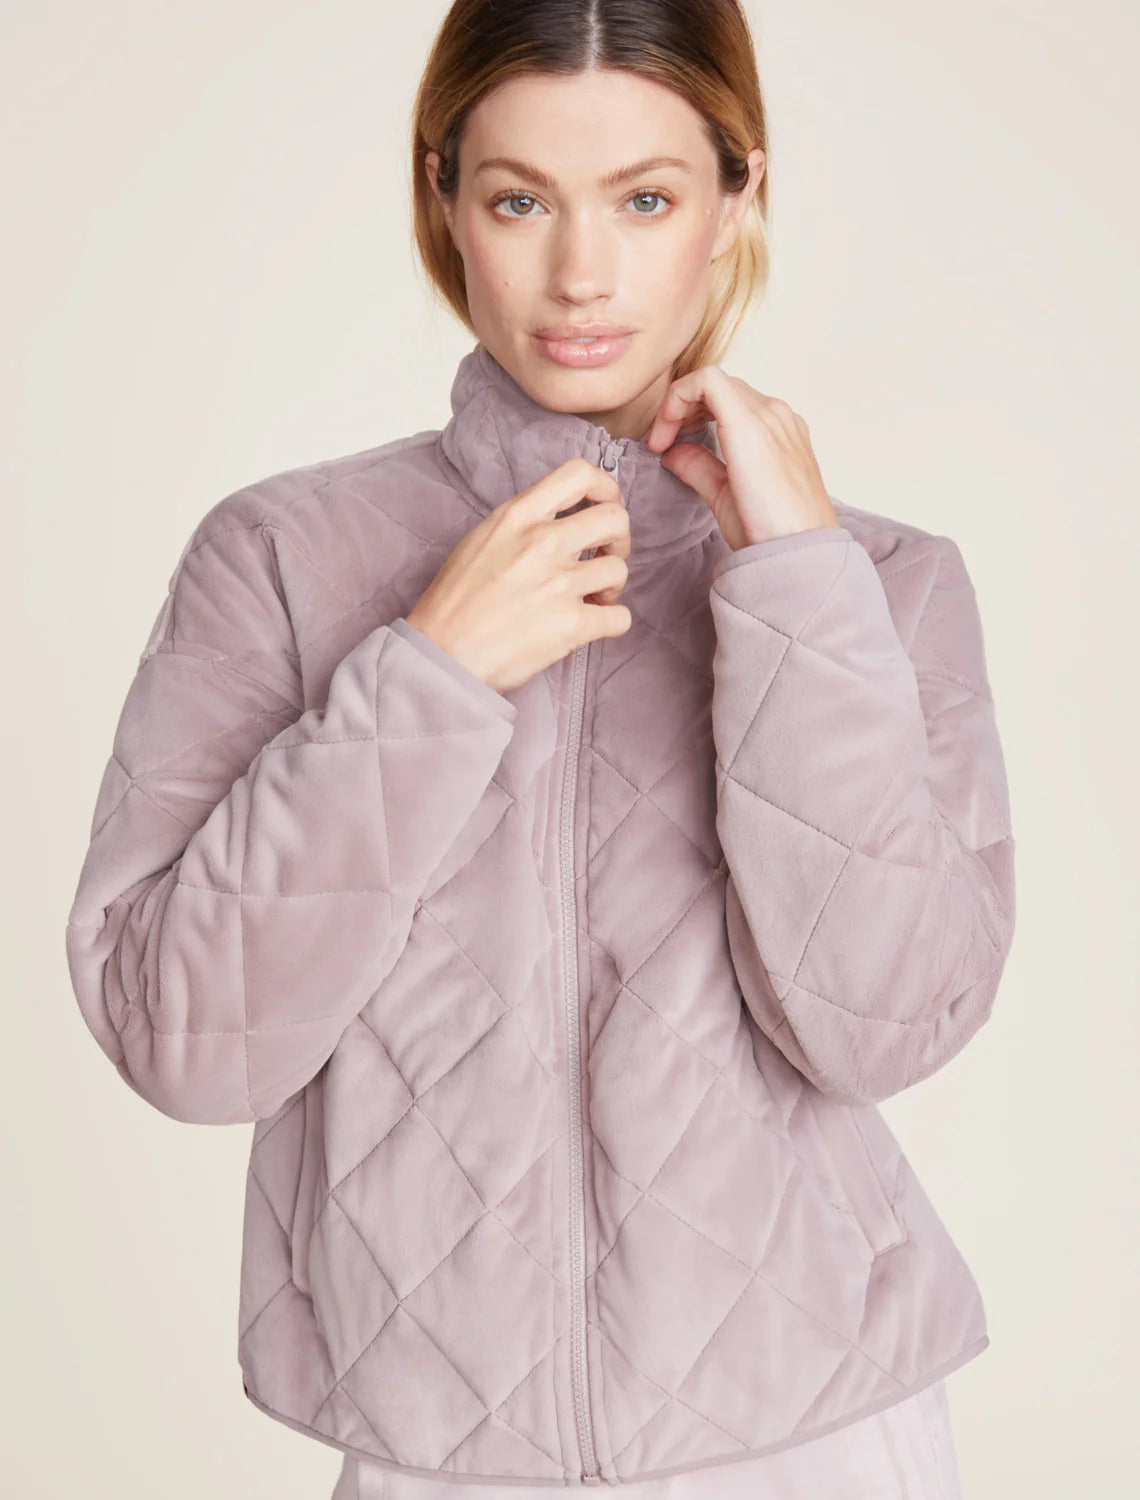 LuxeChic Quilted Jacket - deep taupe. Zipper jacket is made from ultra-soft fabric with diamond quilting for extra comfort. Shop at The Painted Cottage in Edgewater, MD.